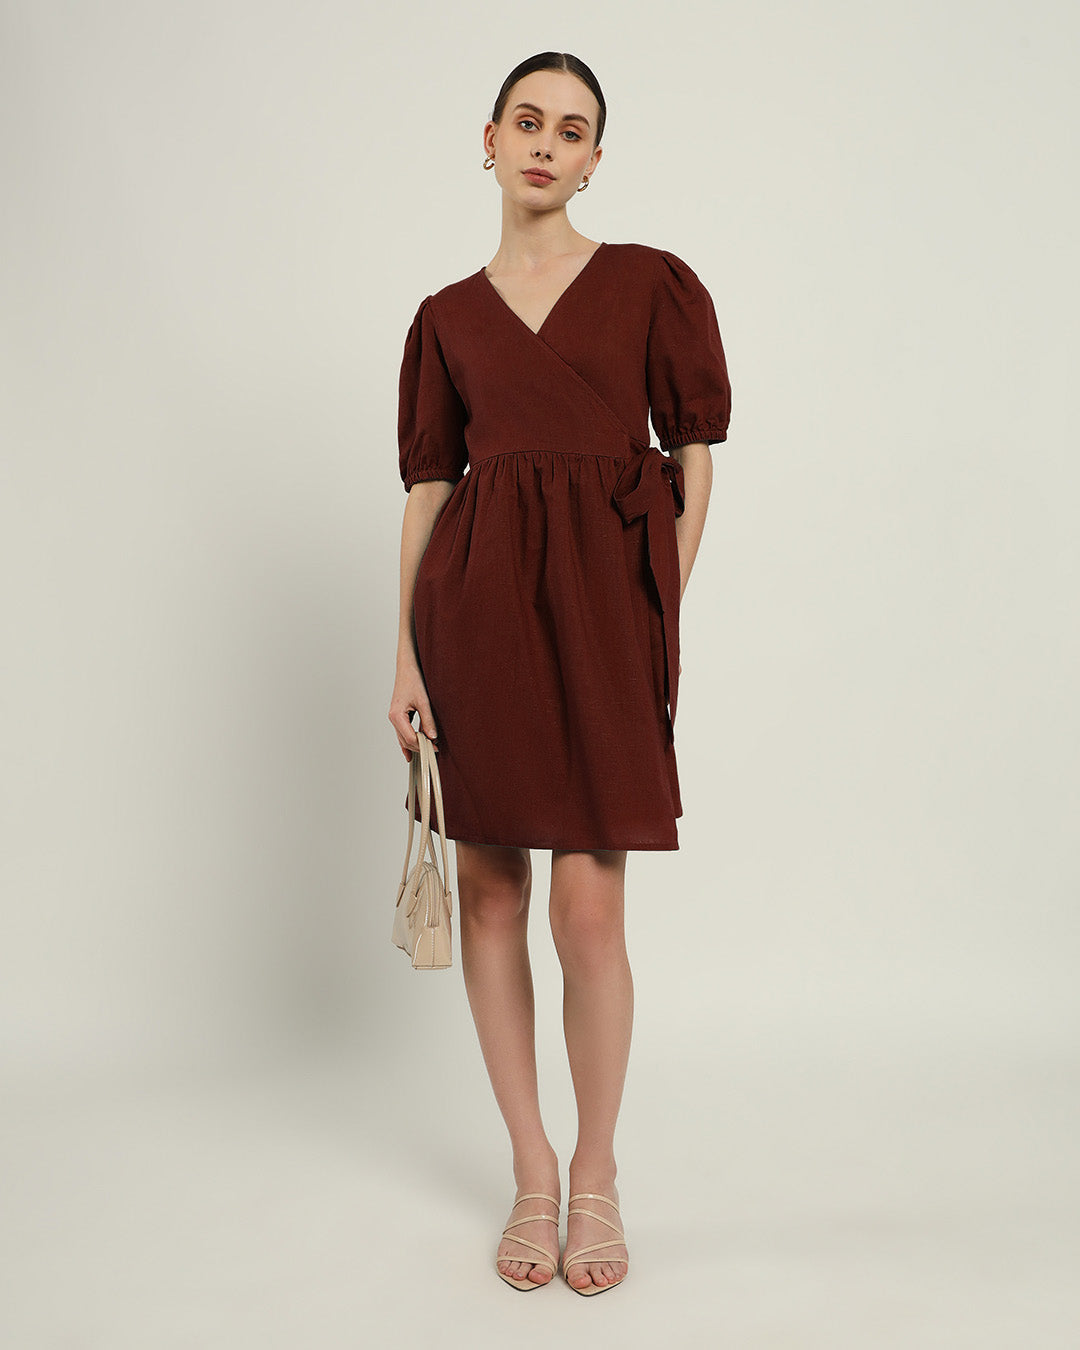 The Inzai Rouge Cotton Dress